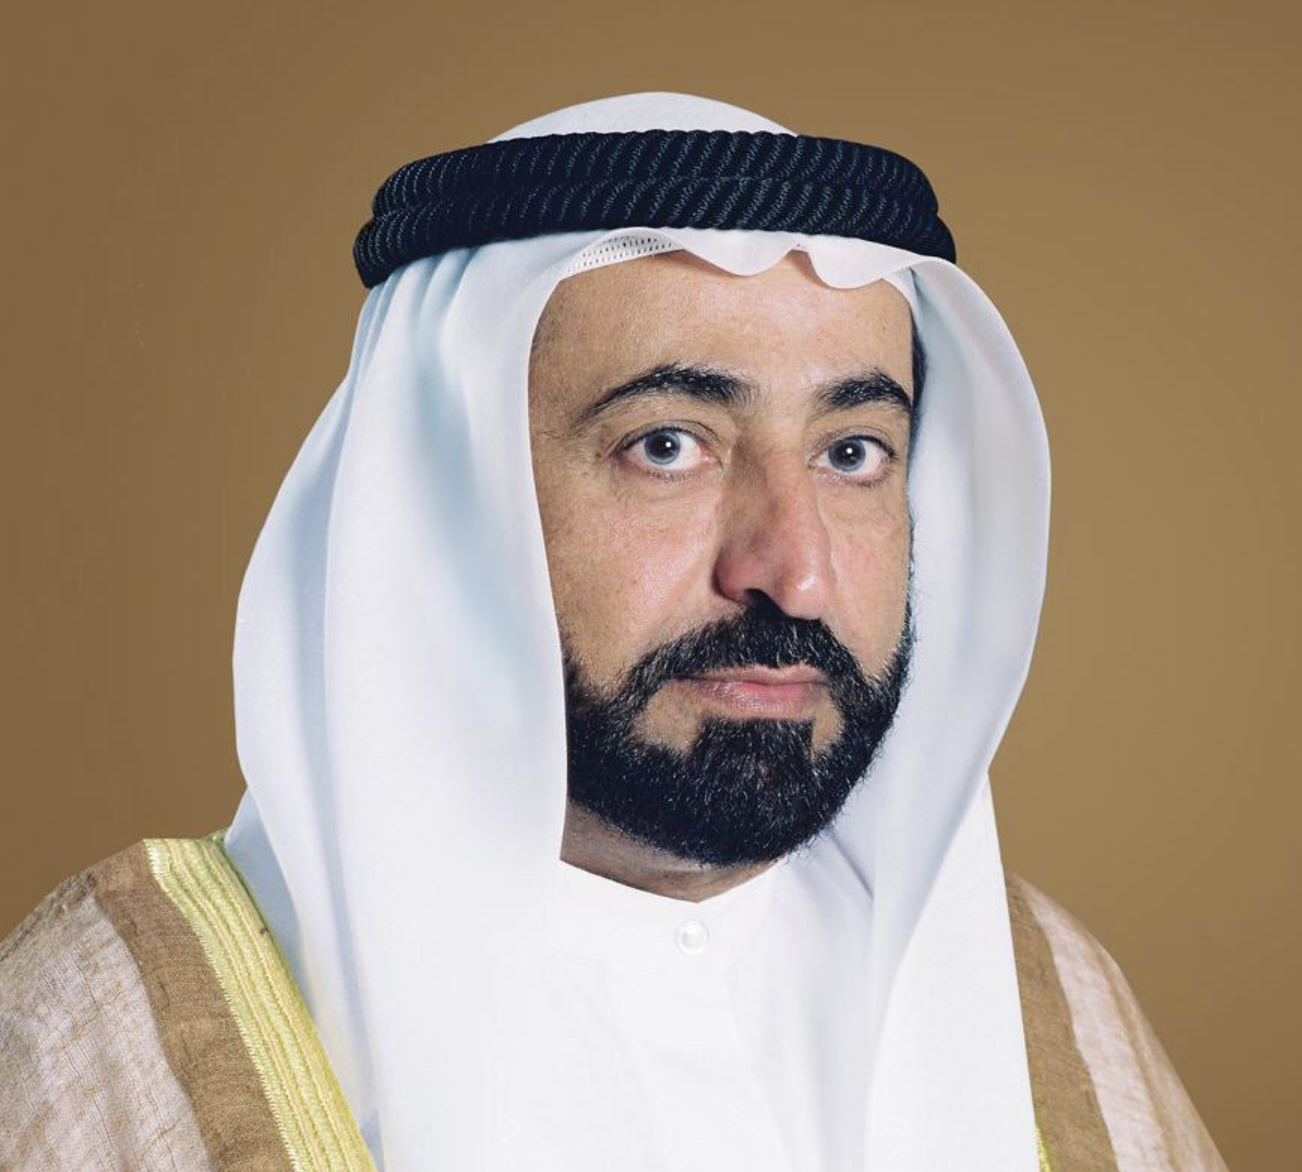 Sharjah Ruler appoints Barlow as SPAA Director